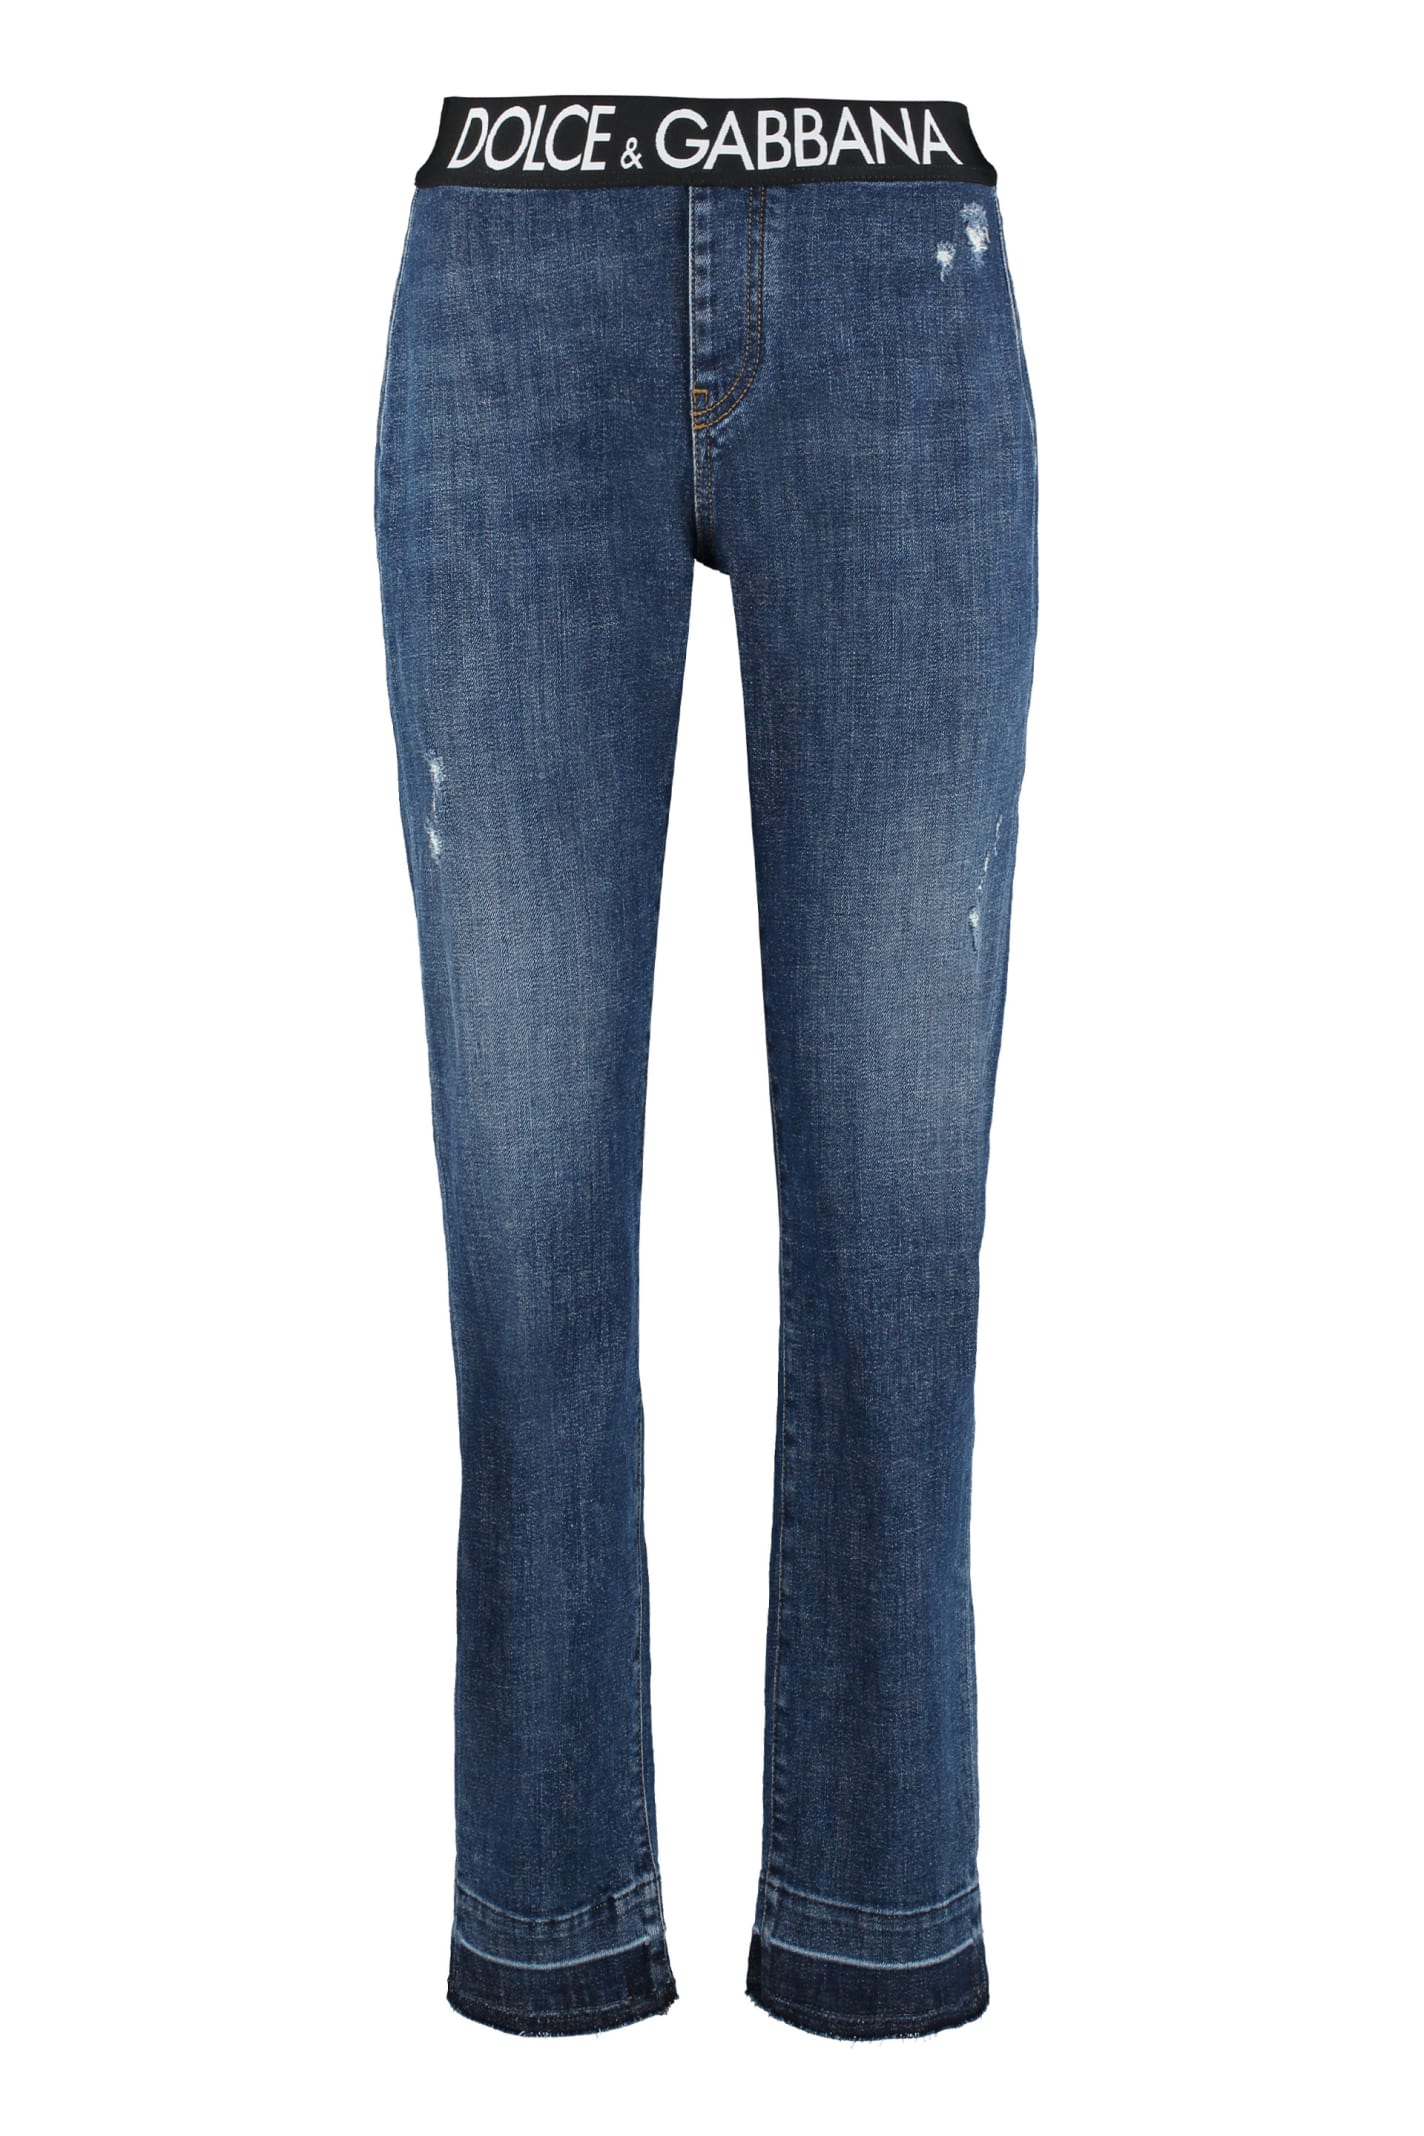 Dolce & Gabbana High-rise Straight Cropped Jeans